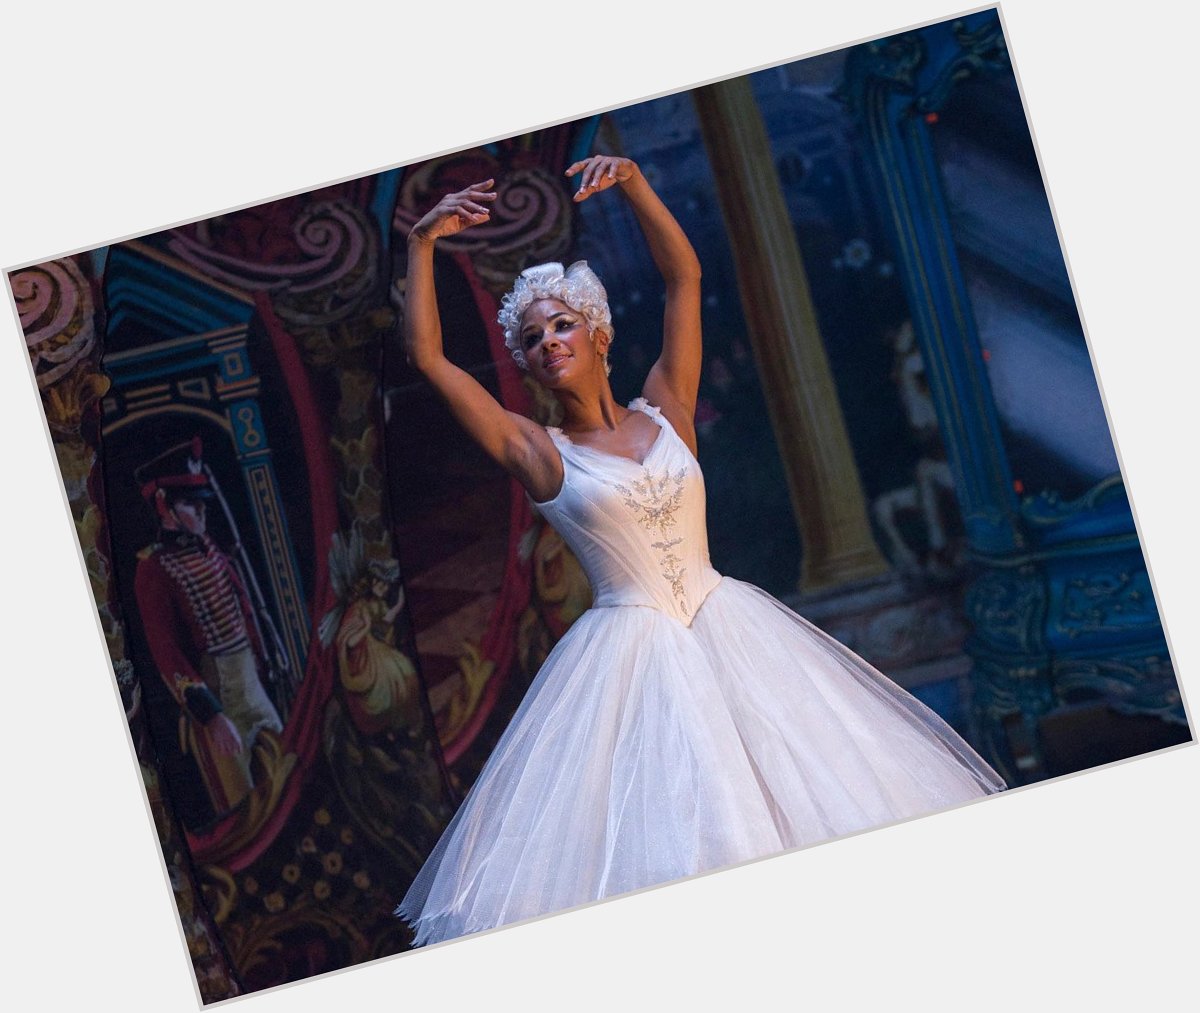 Happy Birthday, Misty Copeland
For Disney, she played the Ballerina Princess in 